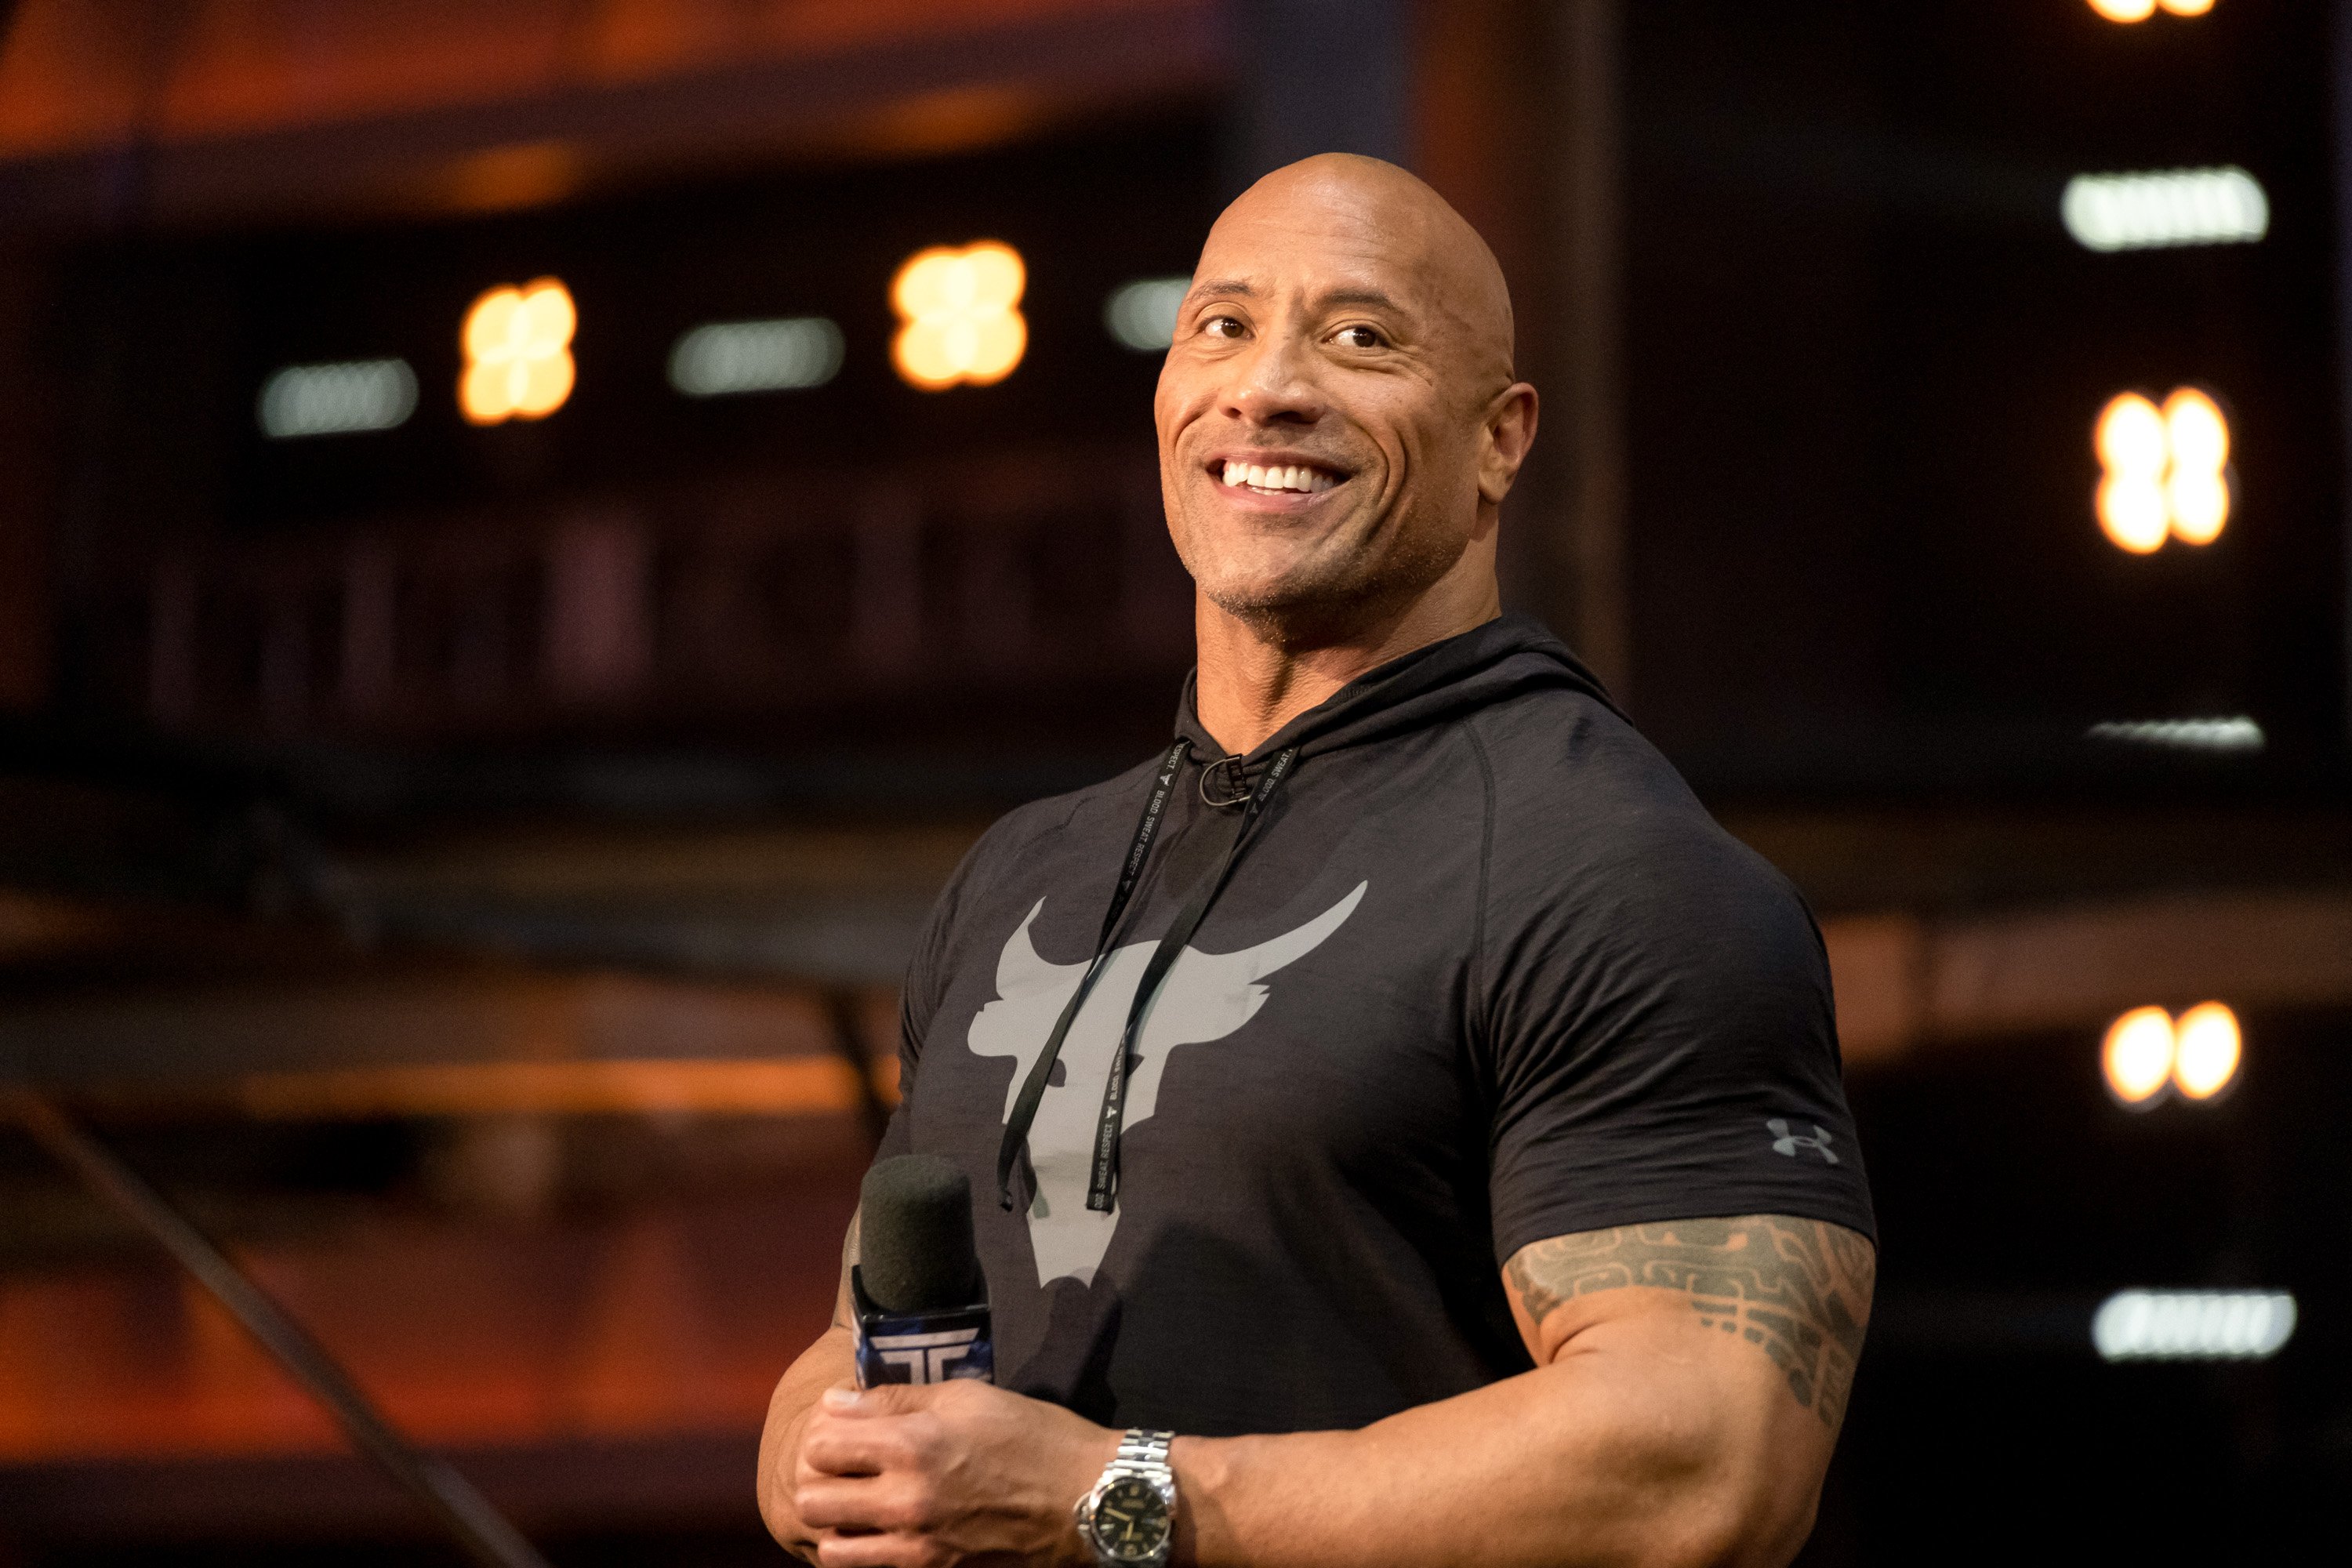 'Jungle Cruise' and 'Black Adam' star Dwayne the Rock Johnson. He's standing in a black t-shirt and smiling at the camera.